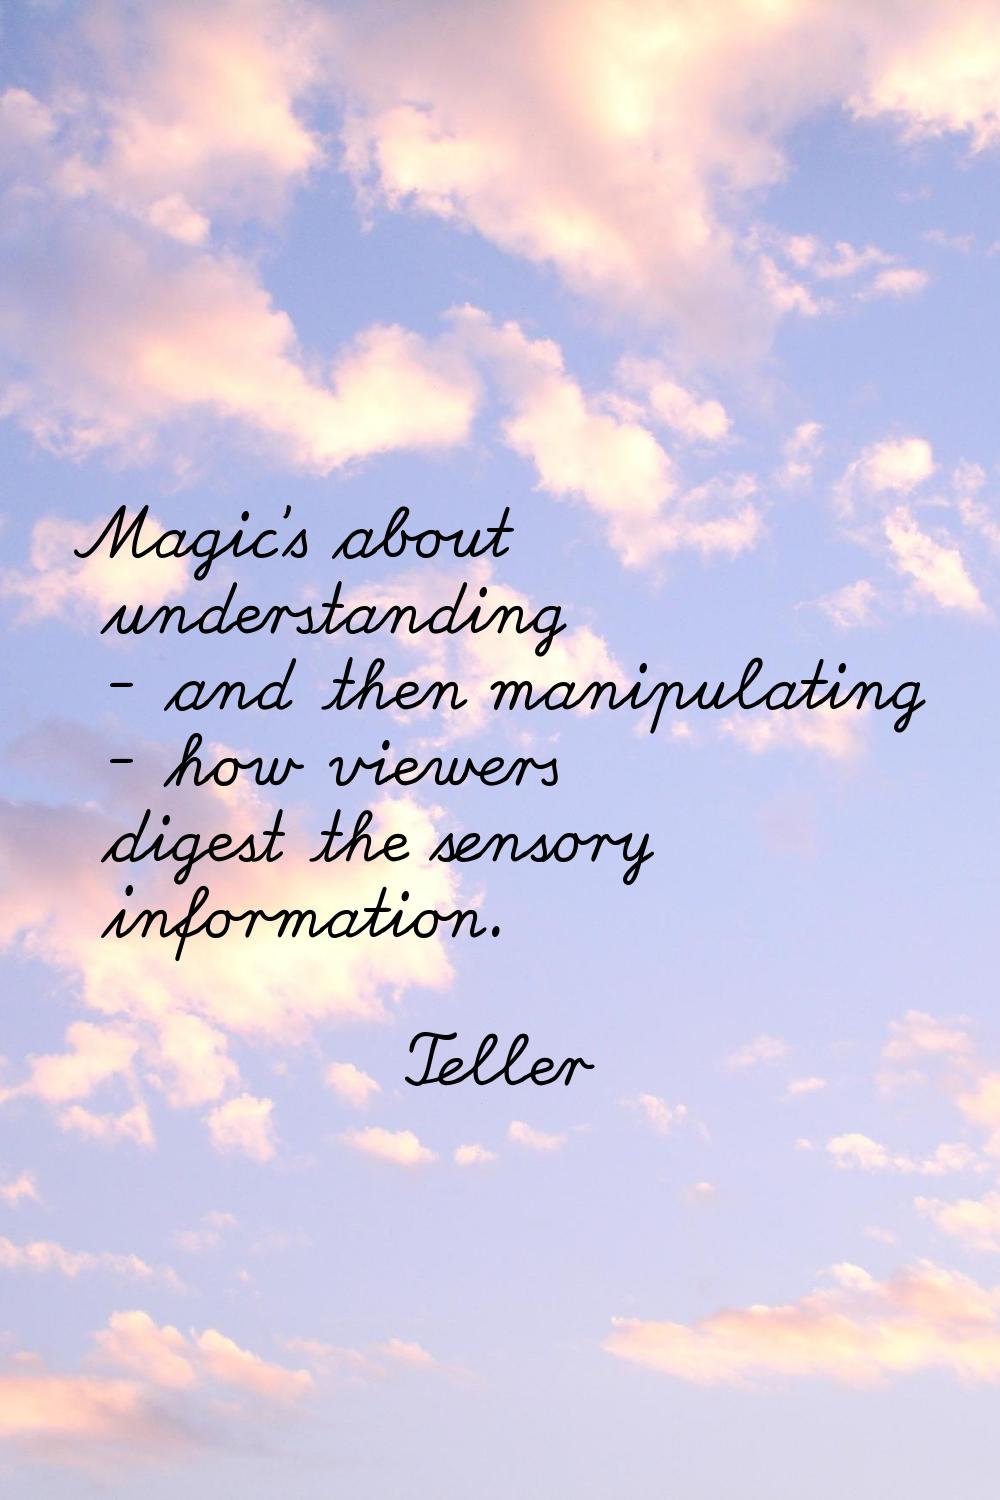 Magic's about understanding - and then manipulating - how viewers digest the sensory information.